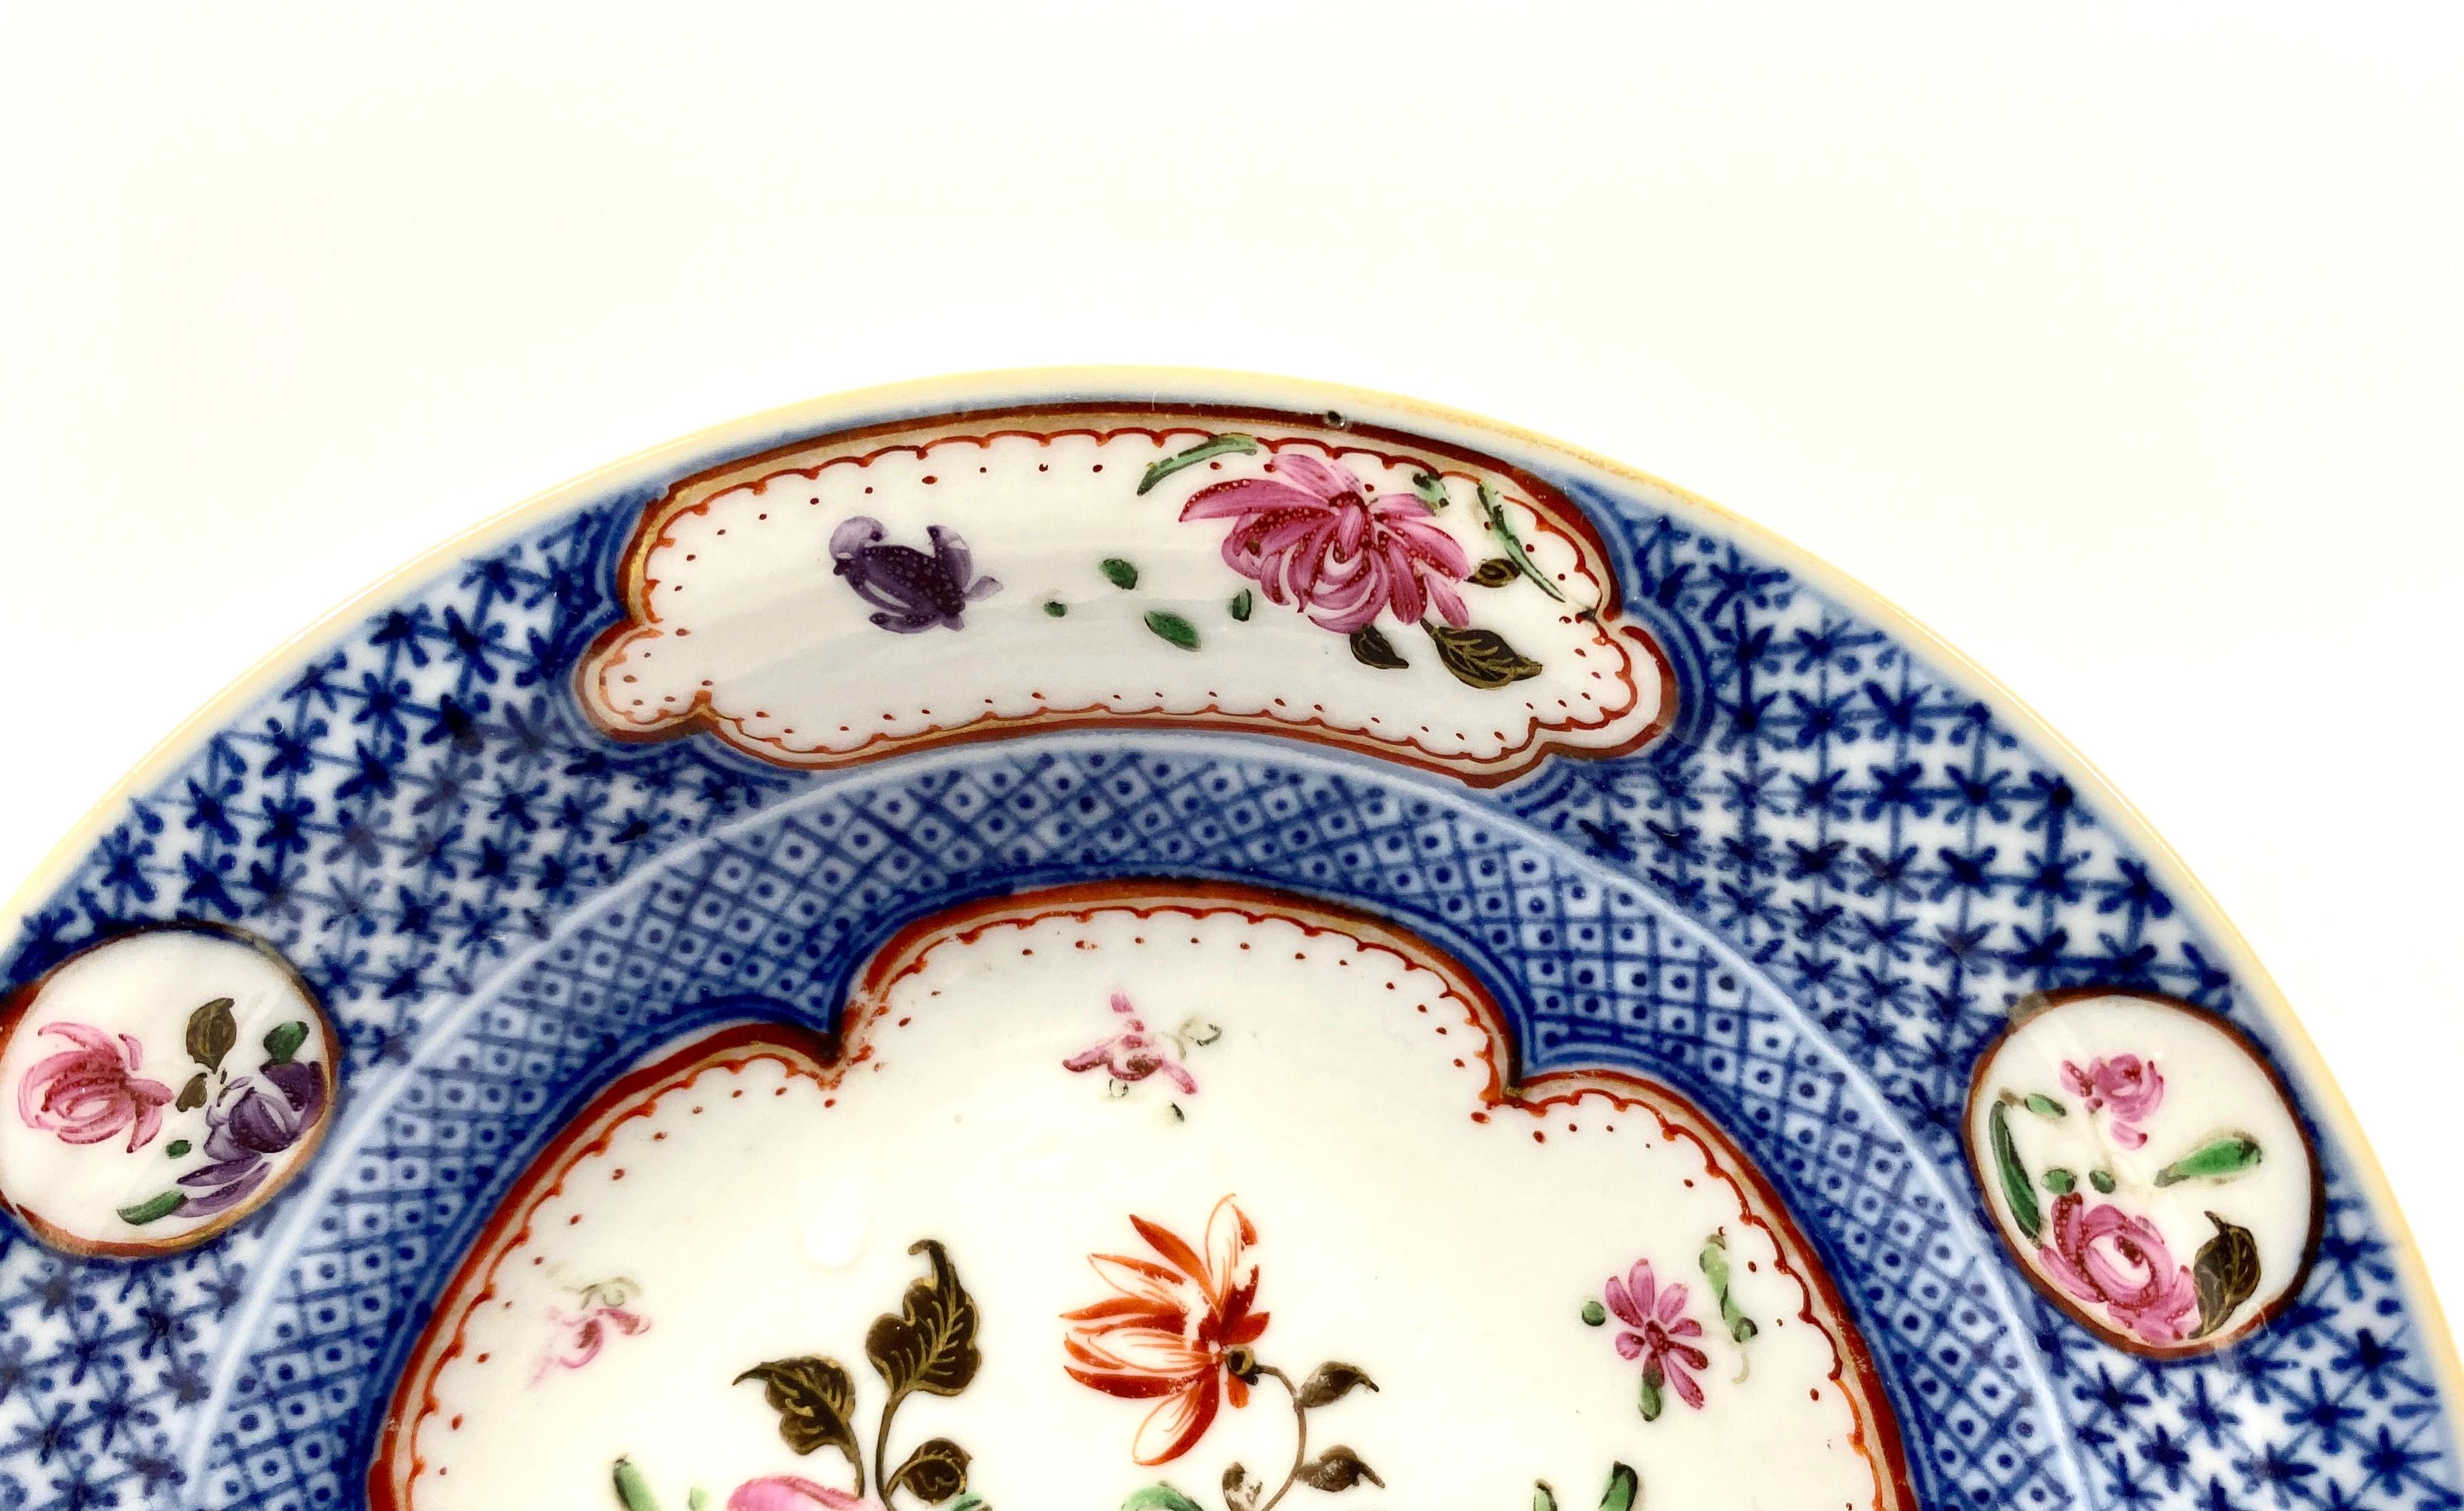 Pair of Chinese Porcelain Dishes, Compagnie des Indes circa 1760 Qianlong Period 5